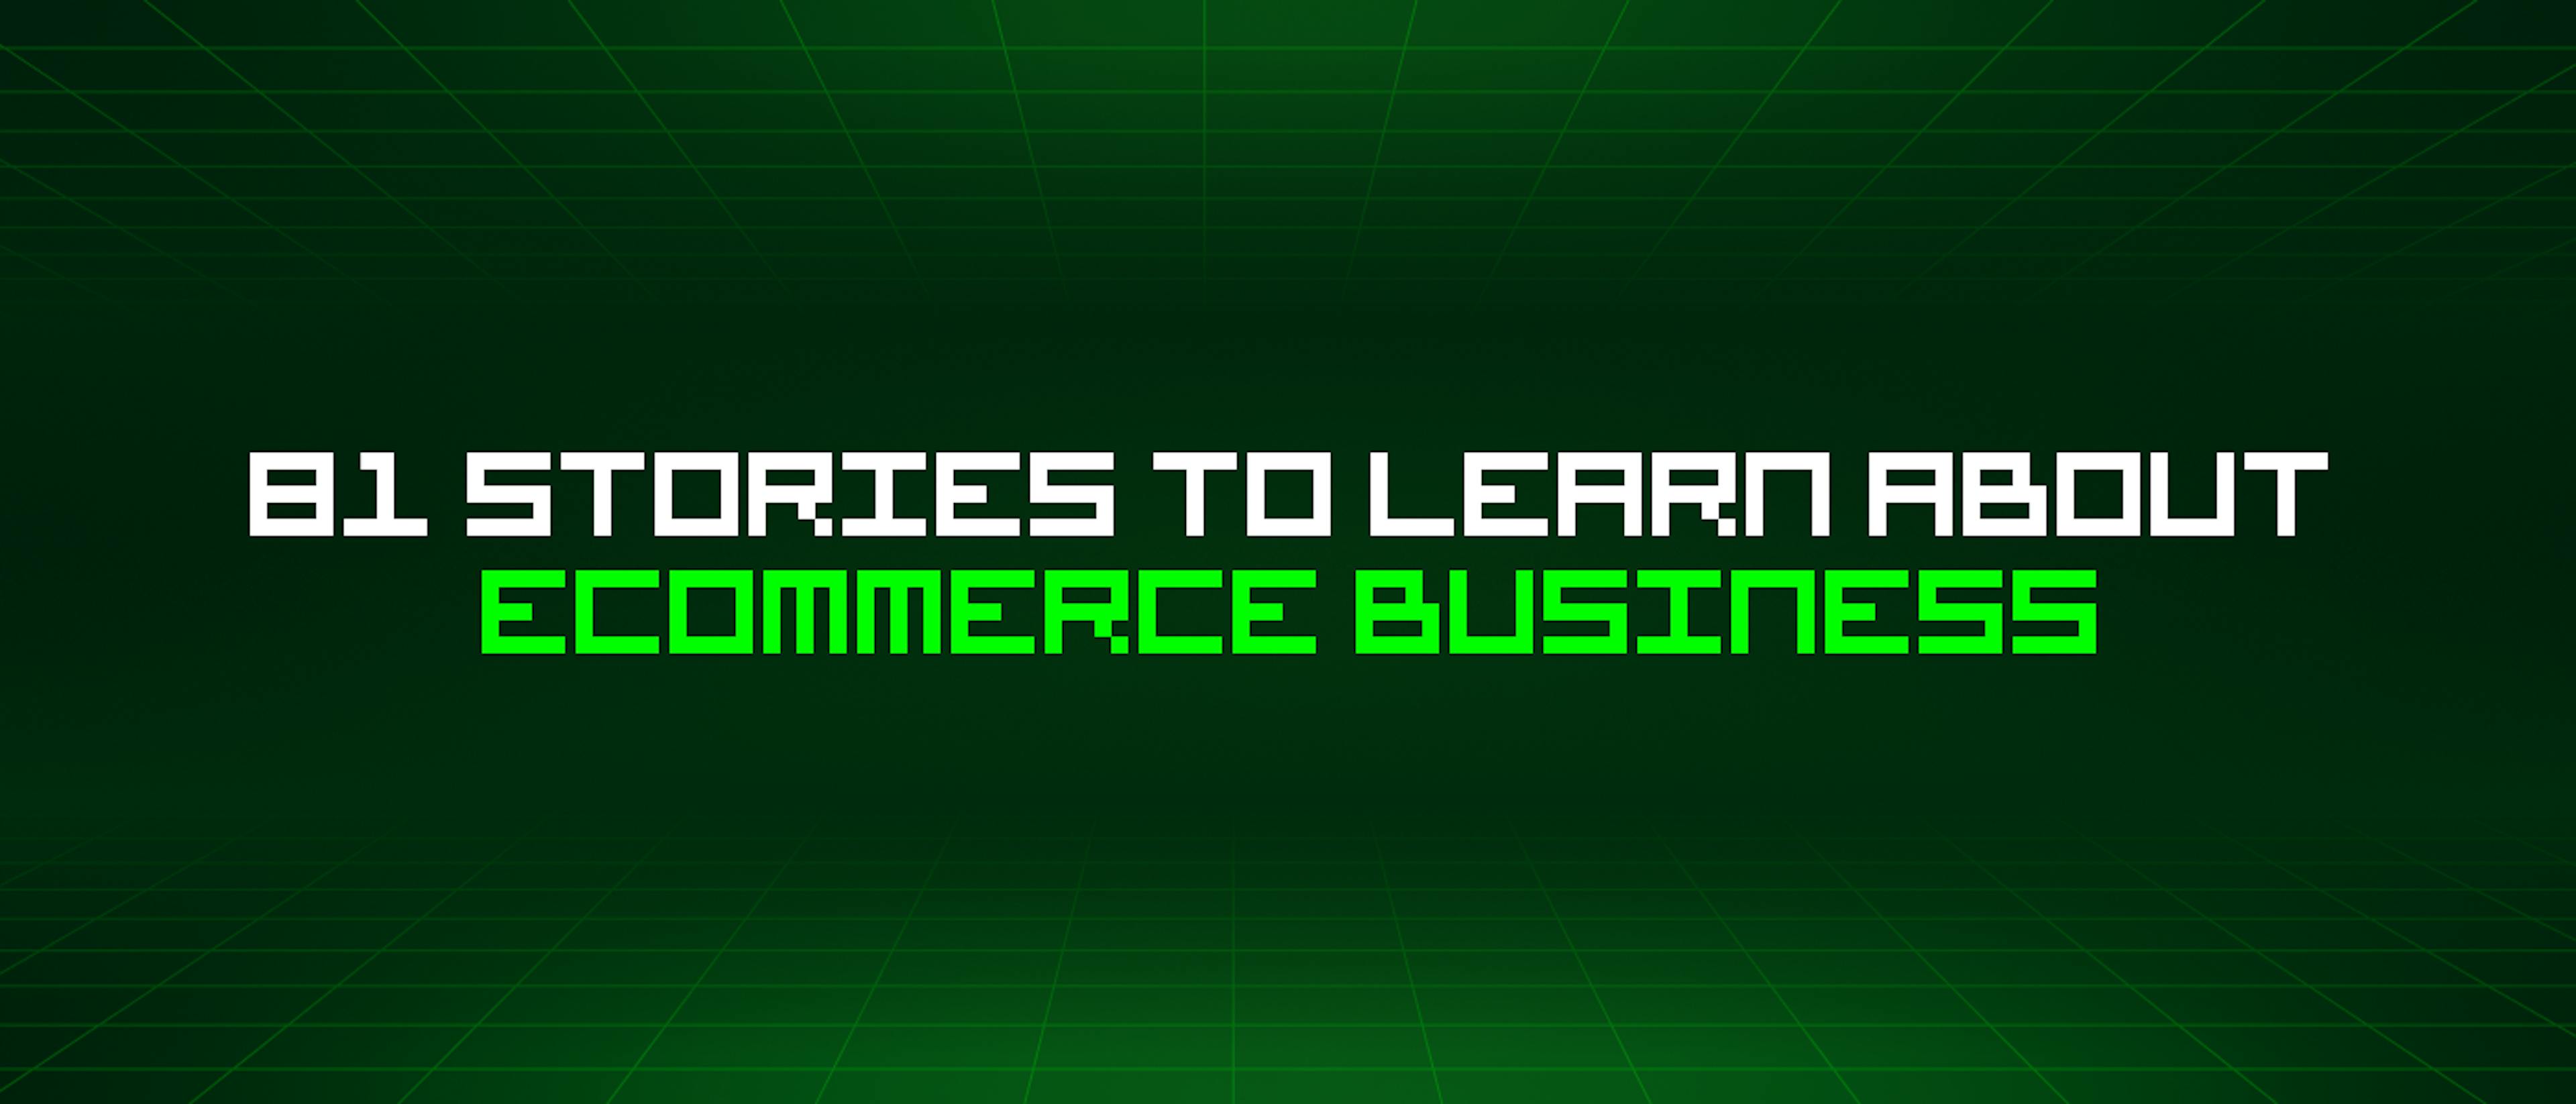 featured image - 81 Stories To Learn About Ecommerce Business